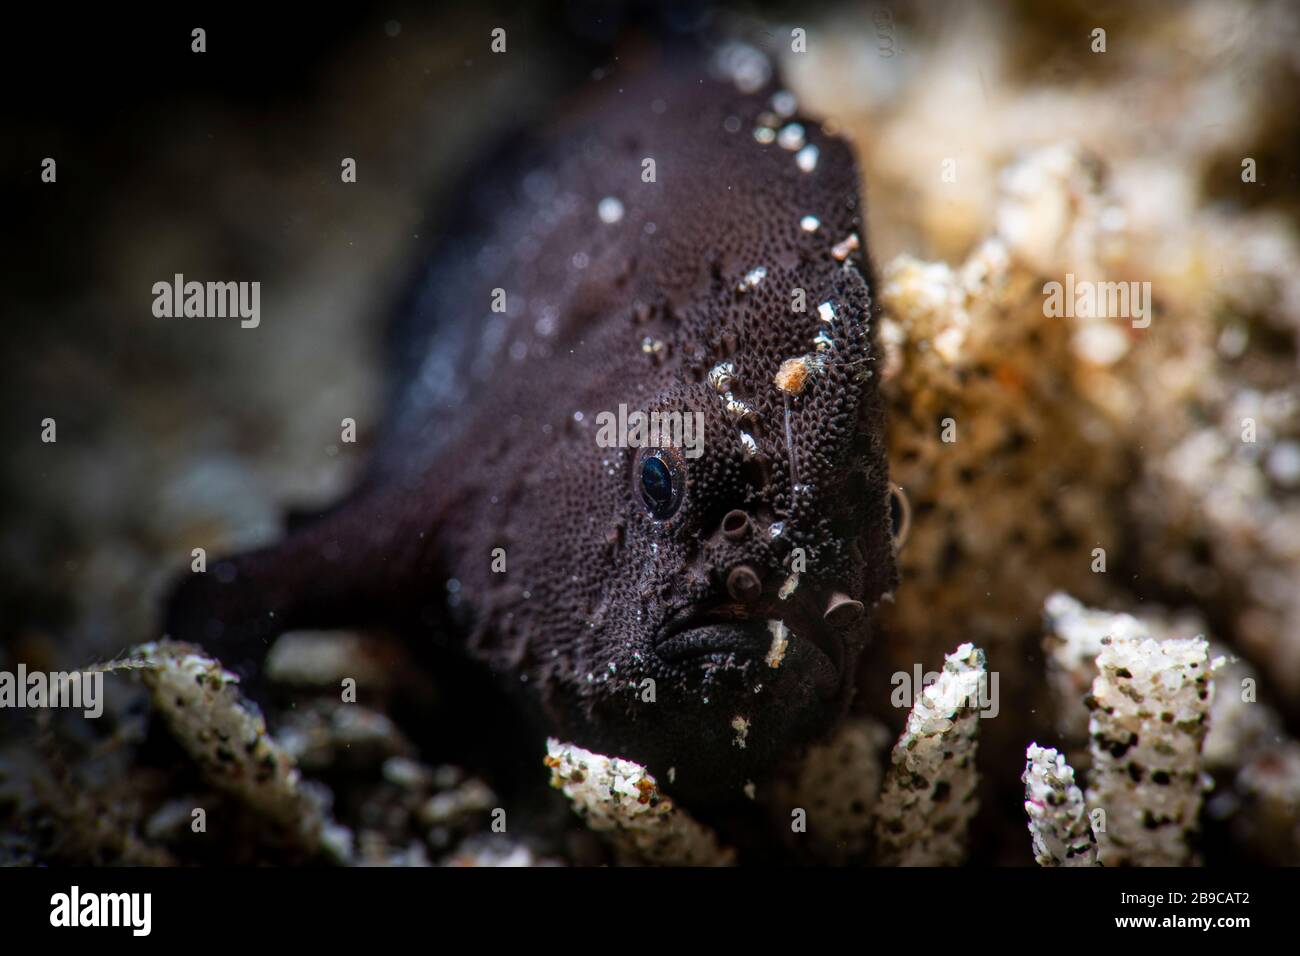 A black, hairy, baby frogfish uses its lure to catch its prey, Anilao, Philippines. Stock Photo